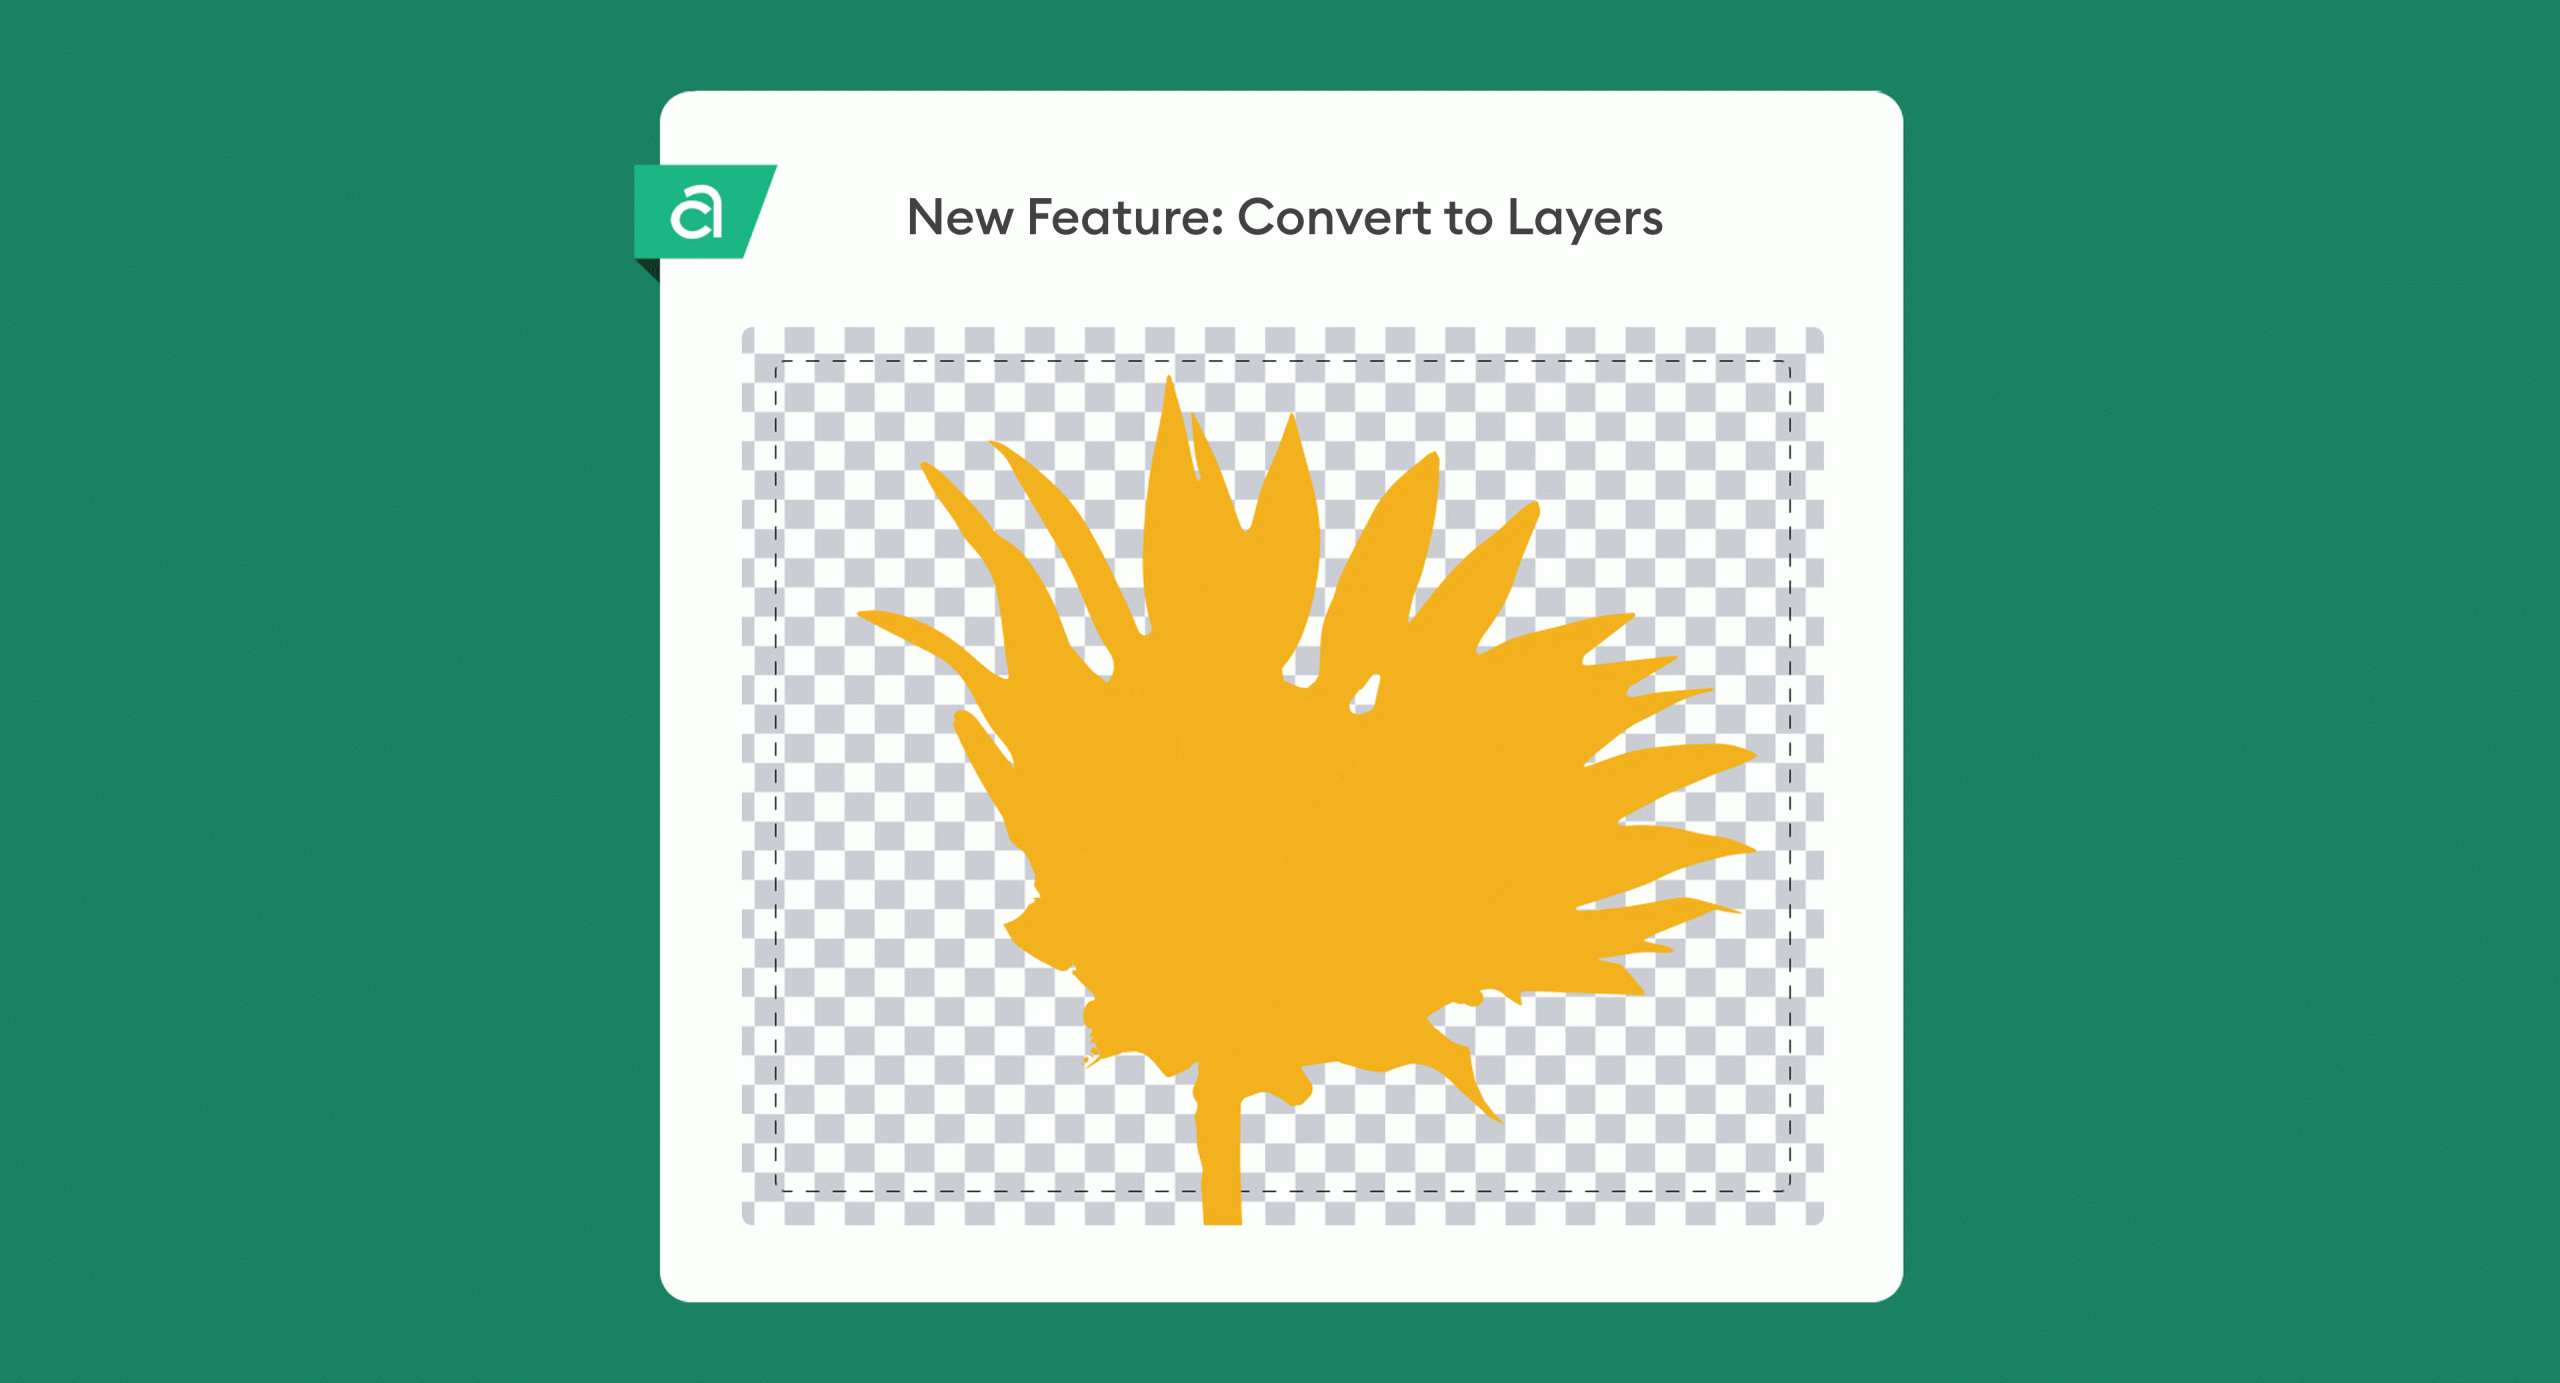 New in Design Space: Convert to Layers